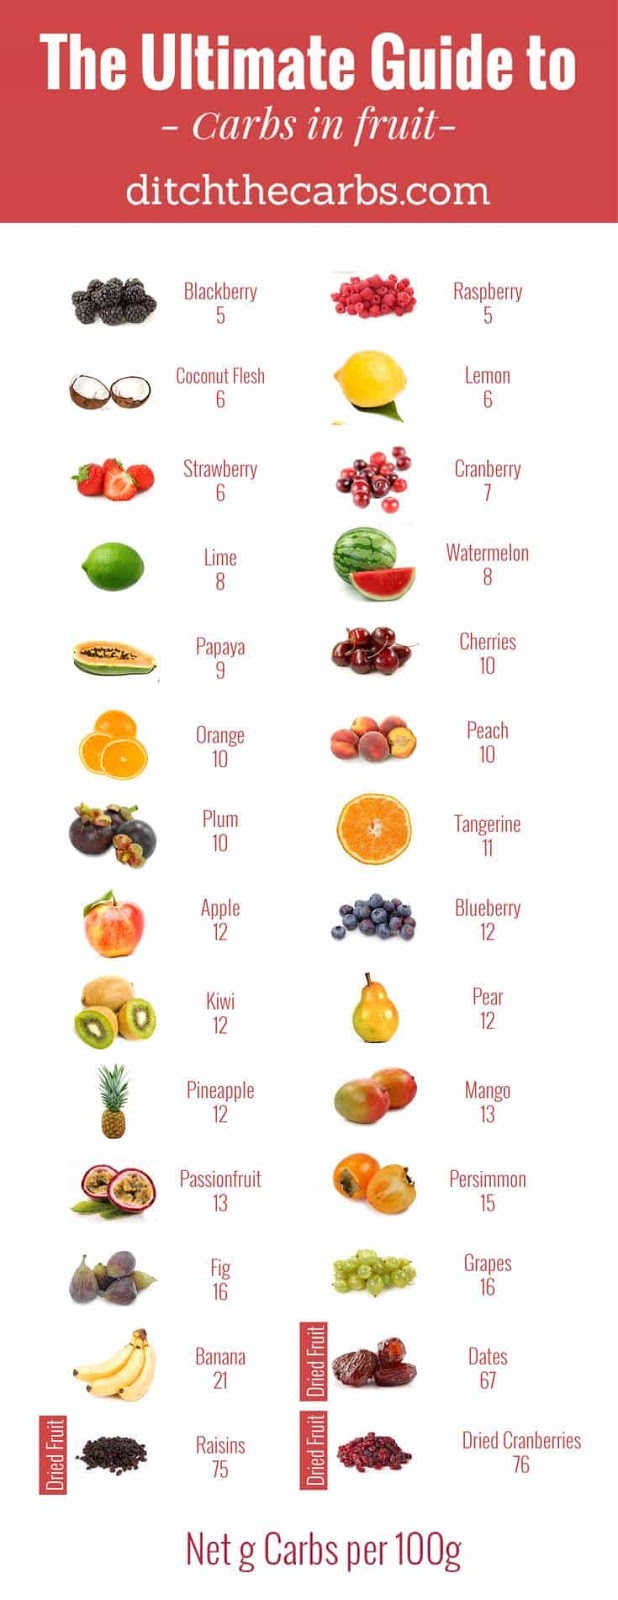 The Low Carb Diabetic: Guide To Carbs In Fruit